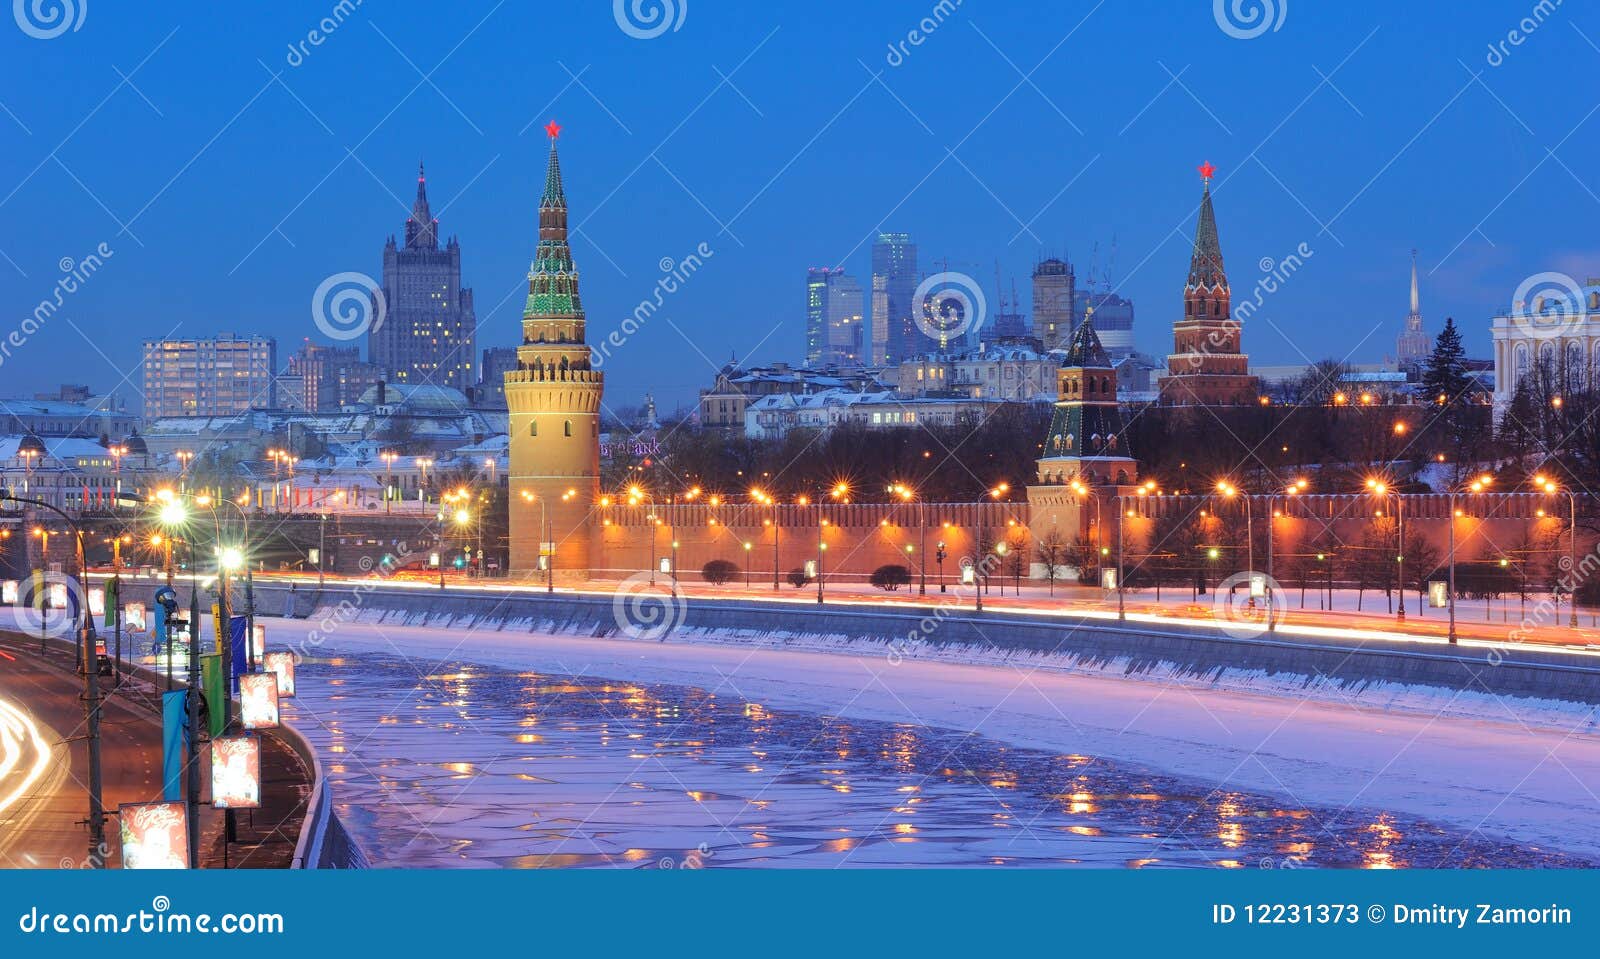 russia. ensemble of moscow kremlin at night